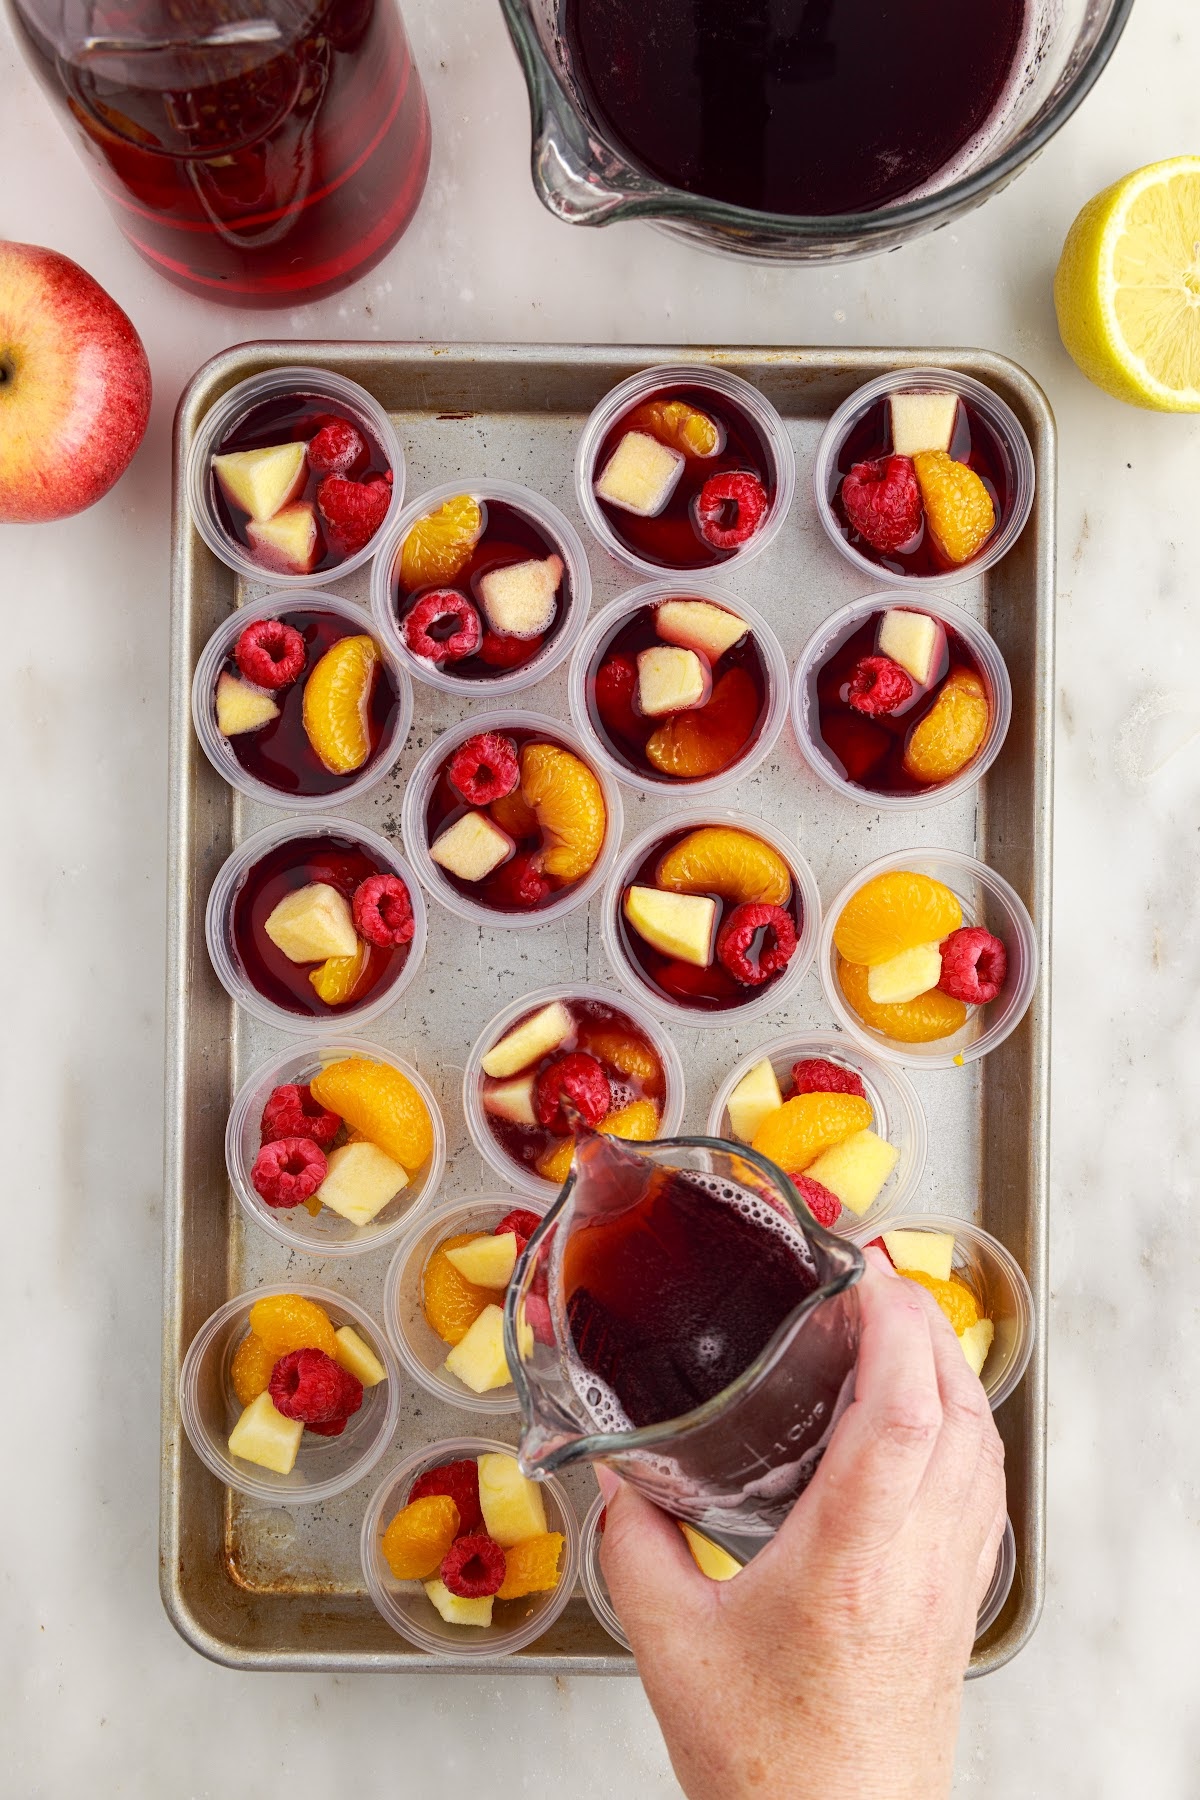 Tray of shot glasses being filled with Sangria mixture.